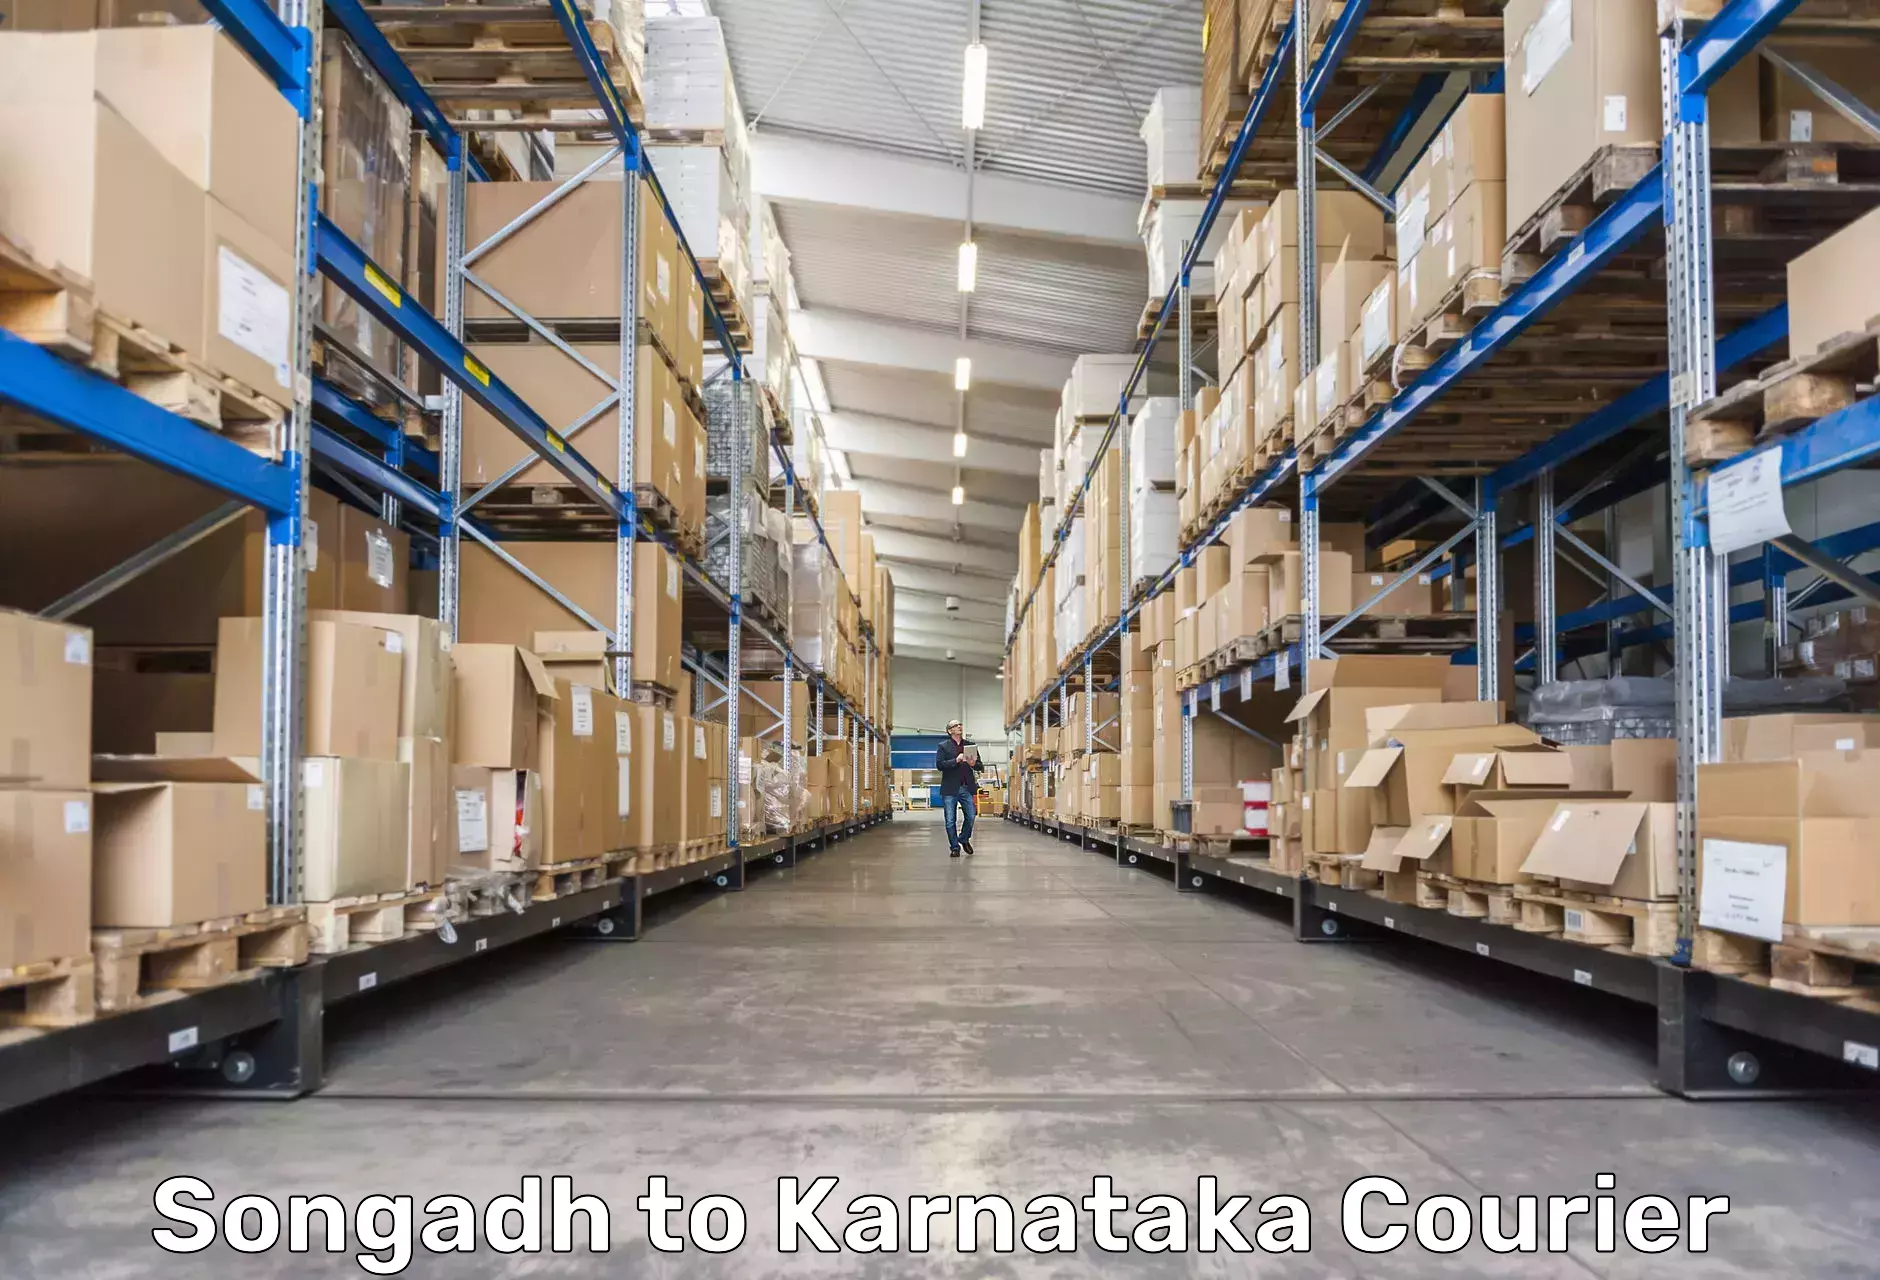 On-call courier service Songadh to Kotturu